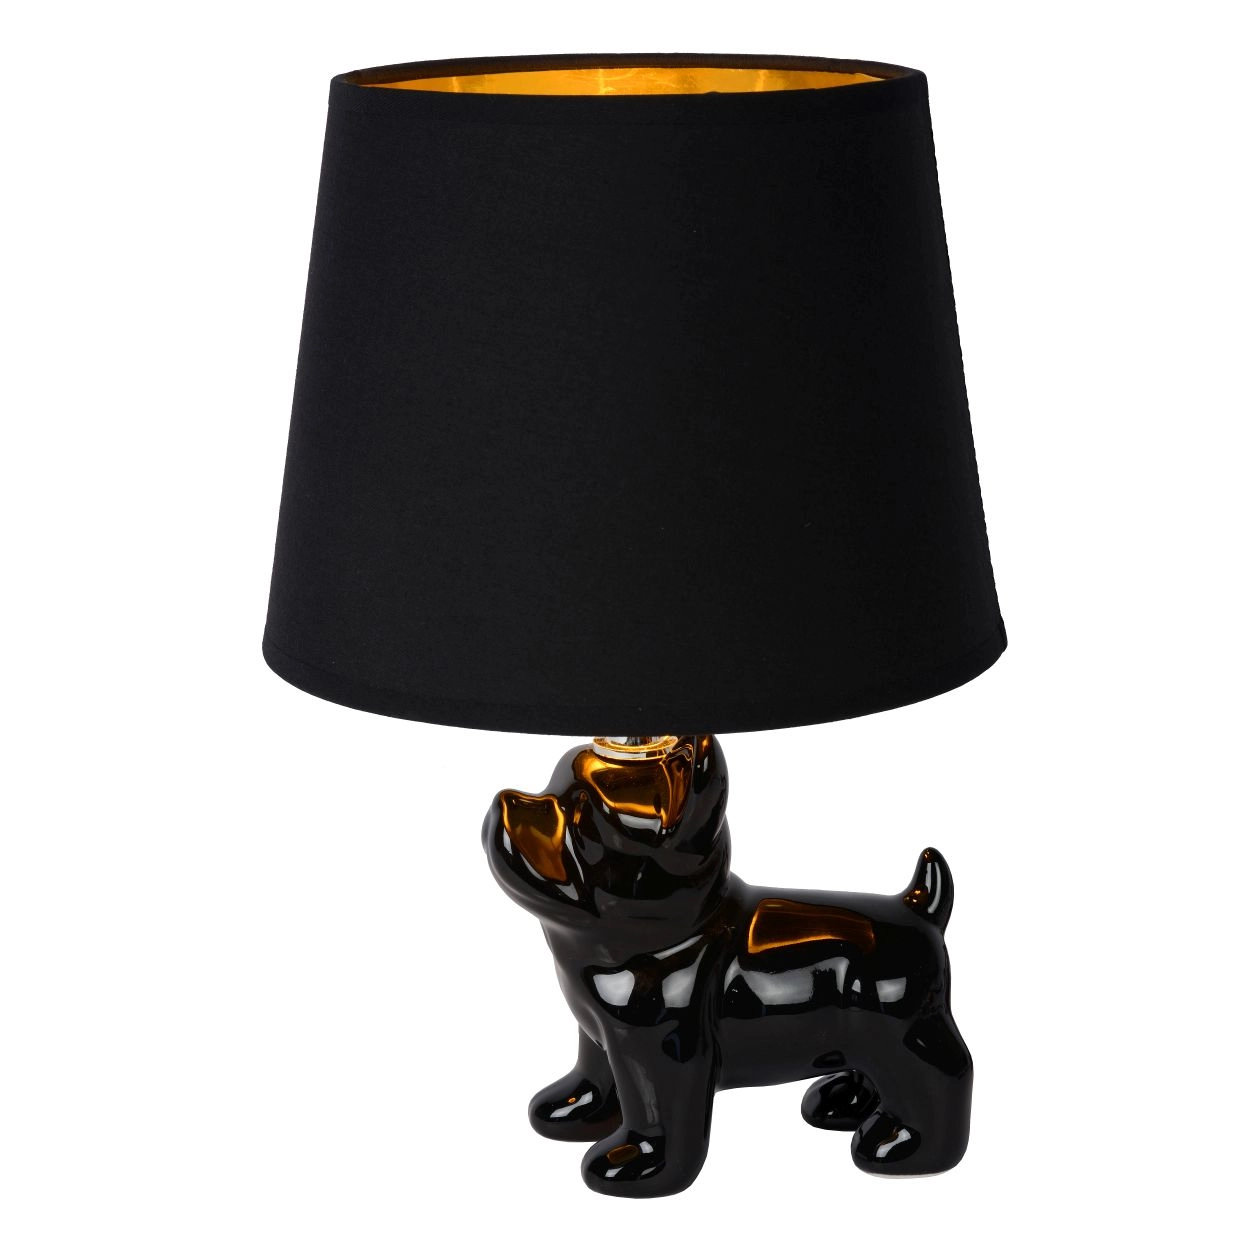 LU 13533/81/30 Lucide EXTRAVAGANZA SIR WINSTON - Table lamp - 1xE14 - Black